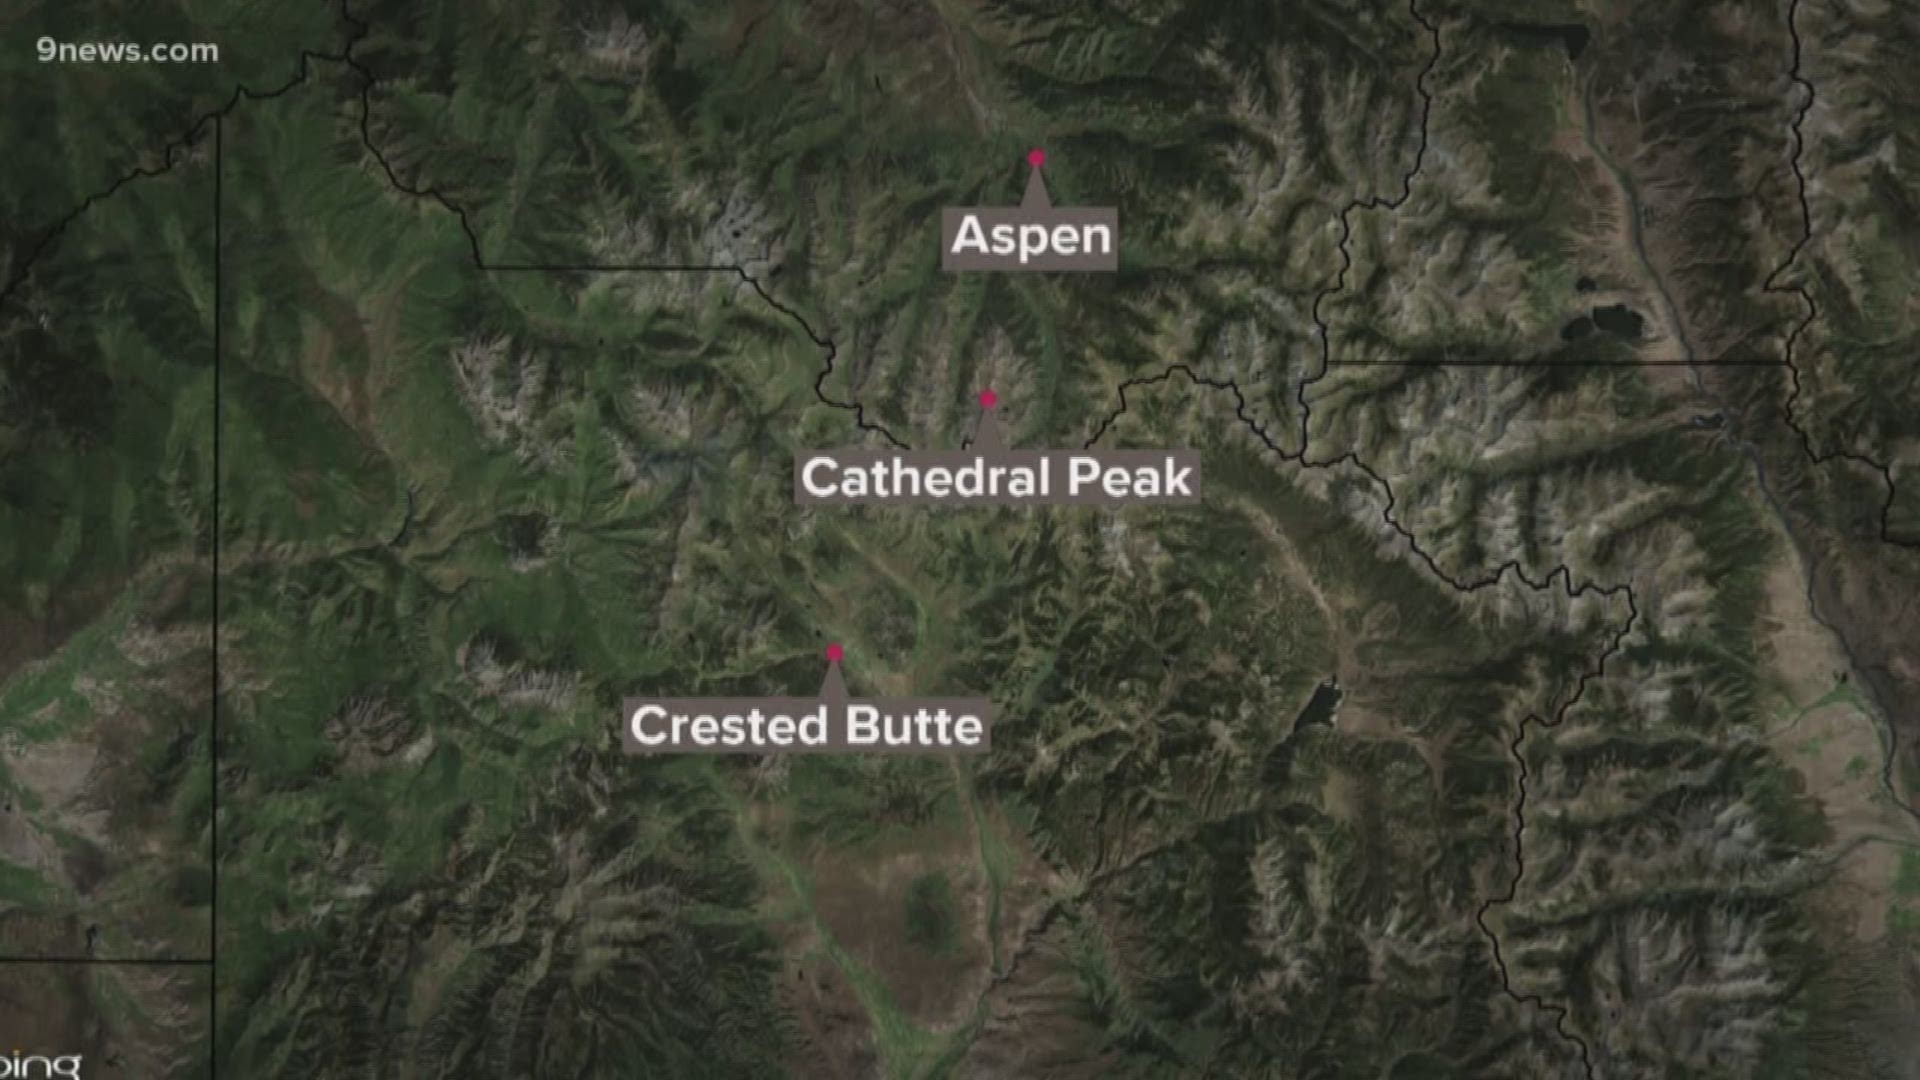 The Pitkin County Sheriff's office says William Wood slid down Cathedral Peak Sunday morning.